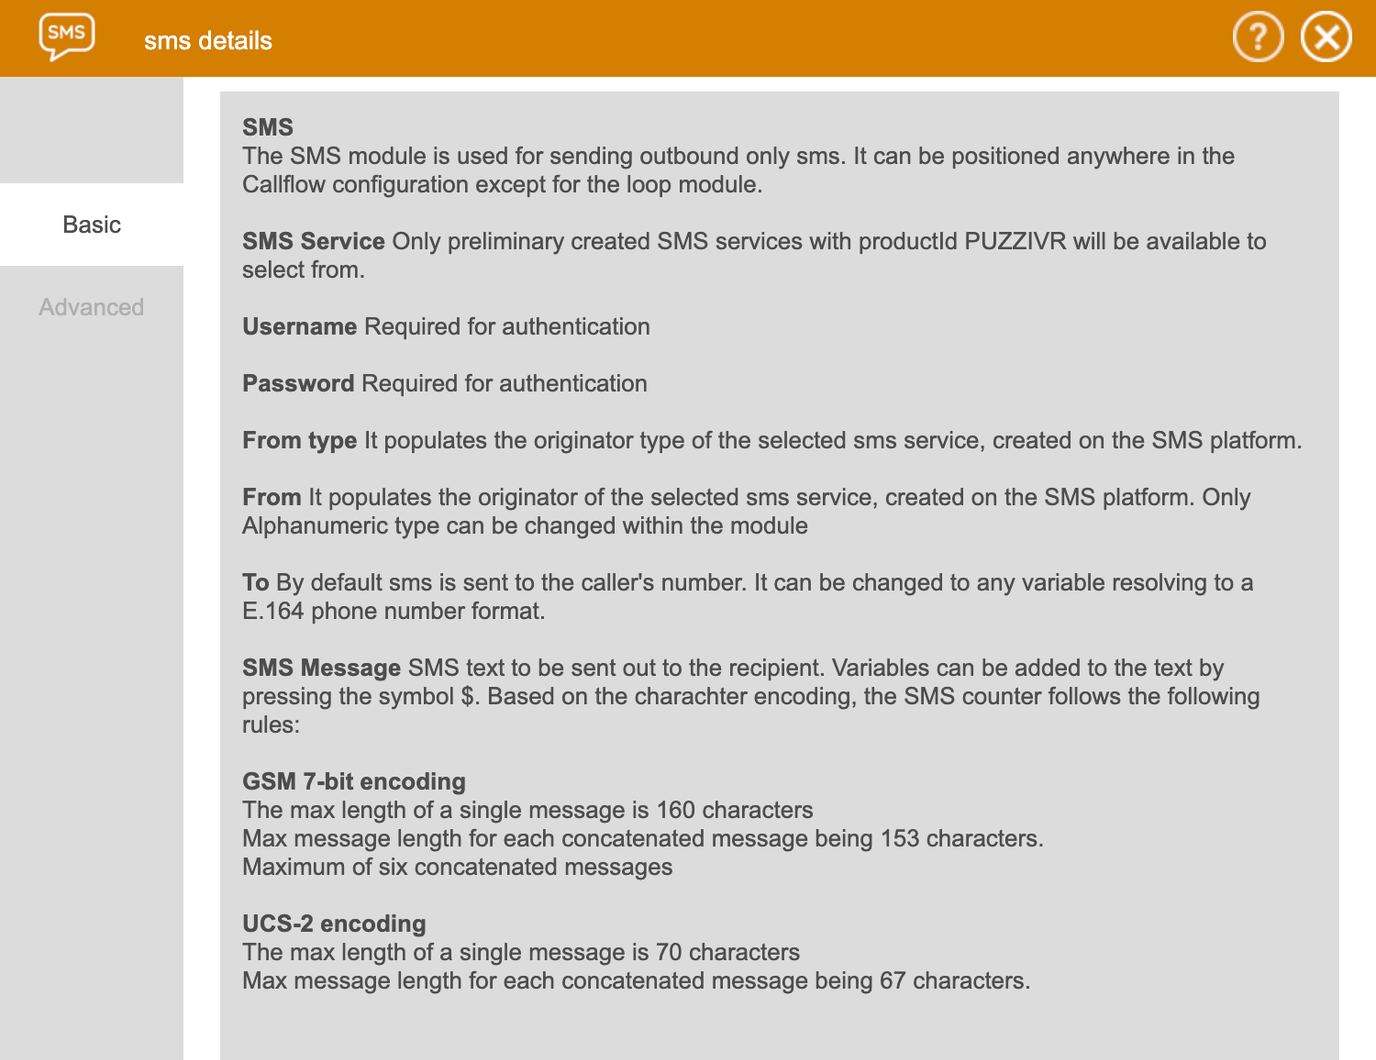 Screenshot of the CFT SMS module's Help view